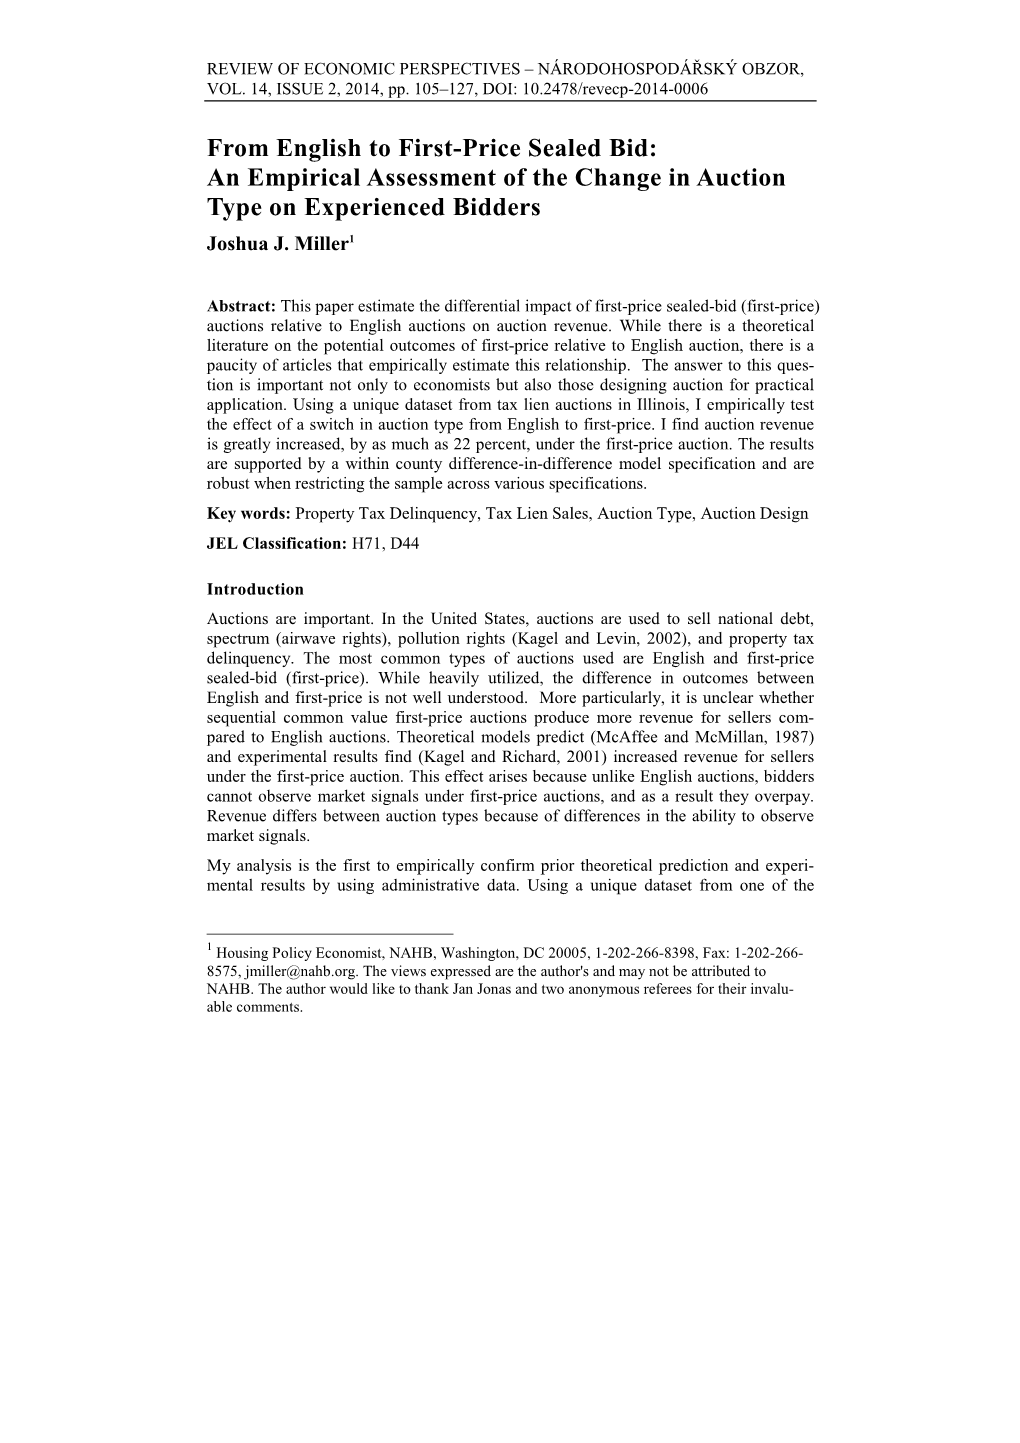 From English to First-Price Sealed Bid: an Empirical Assessment of the Change in Auction Type on Experienced Bidders Joshua J